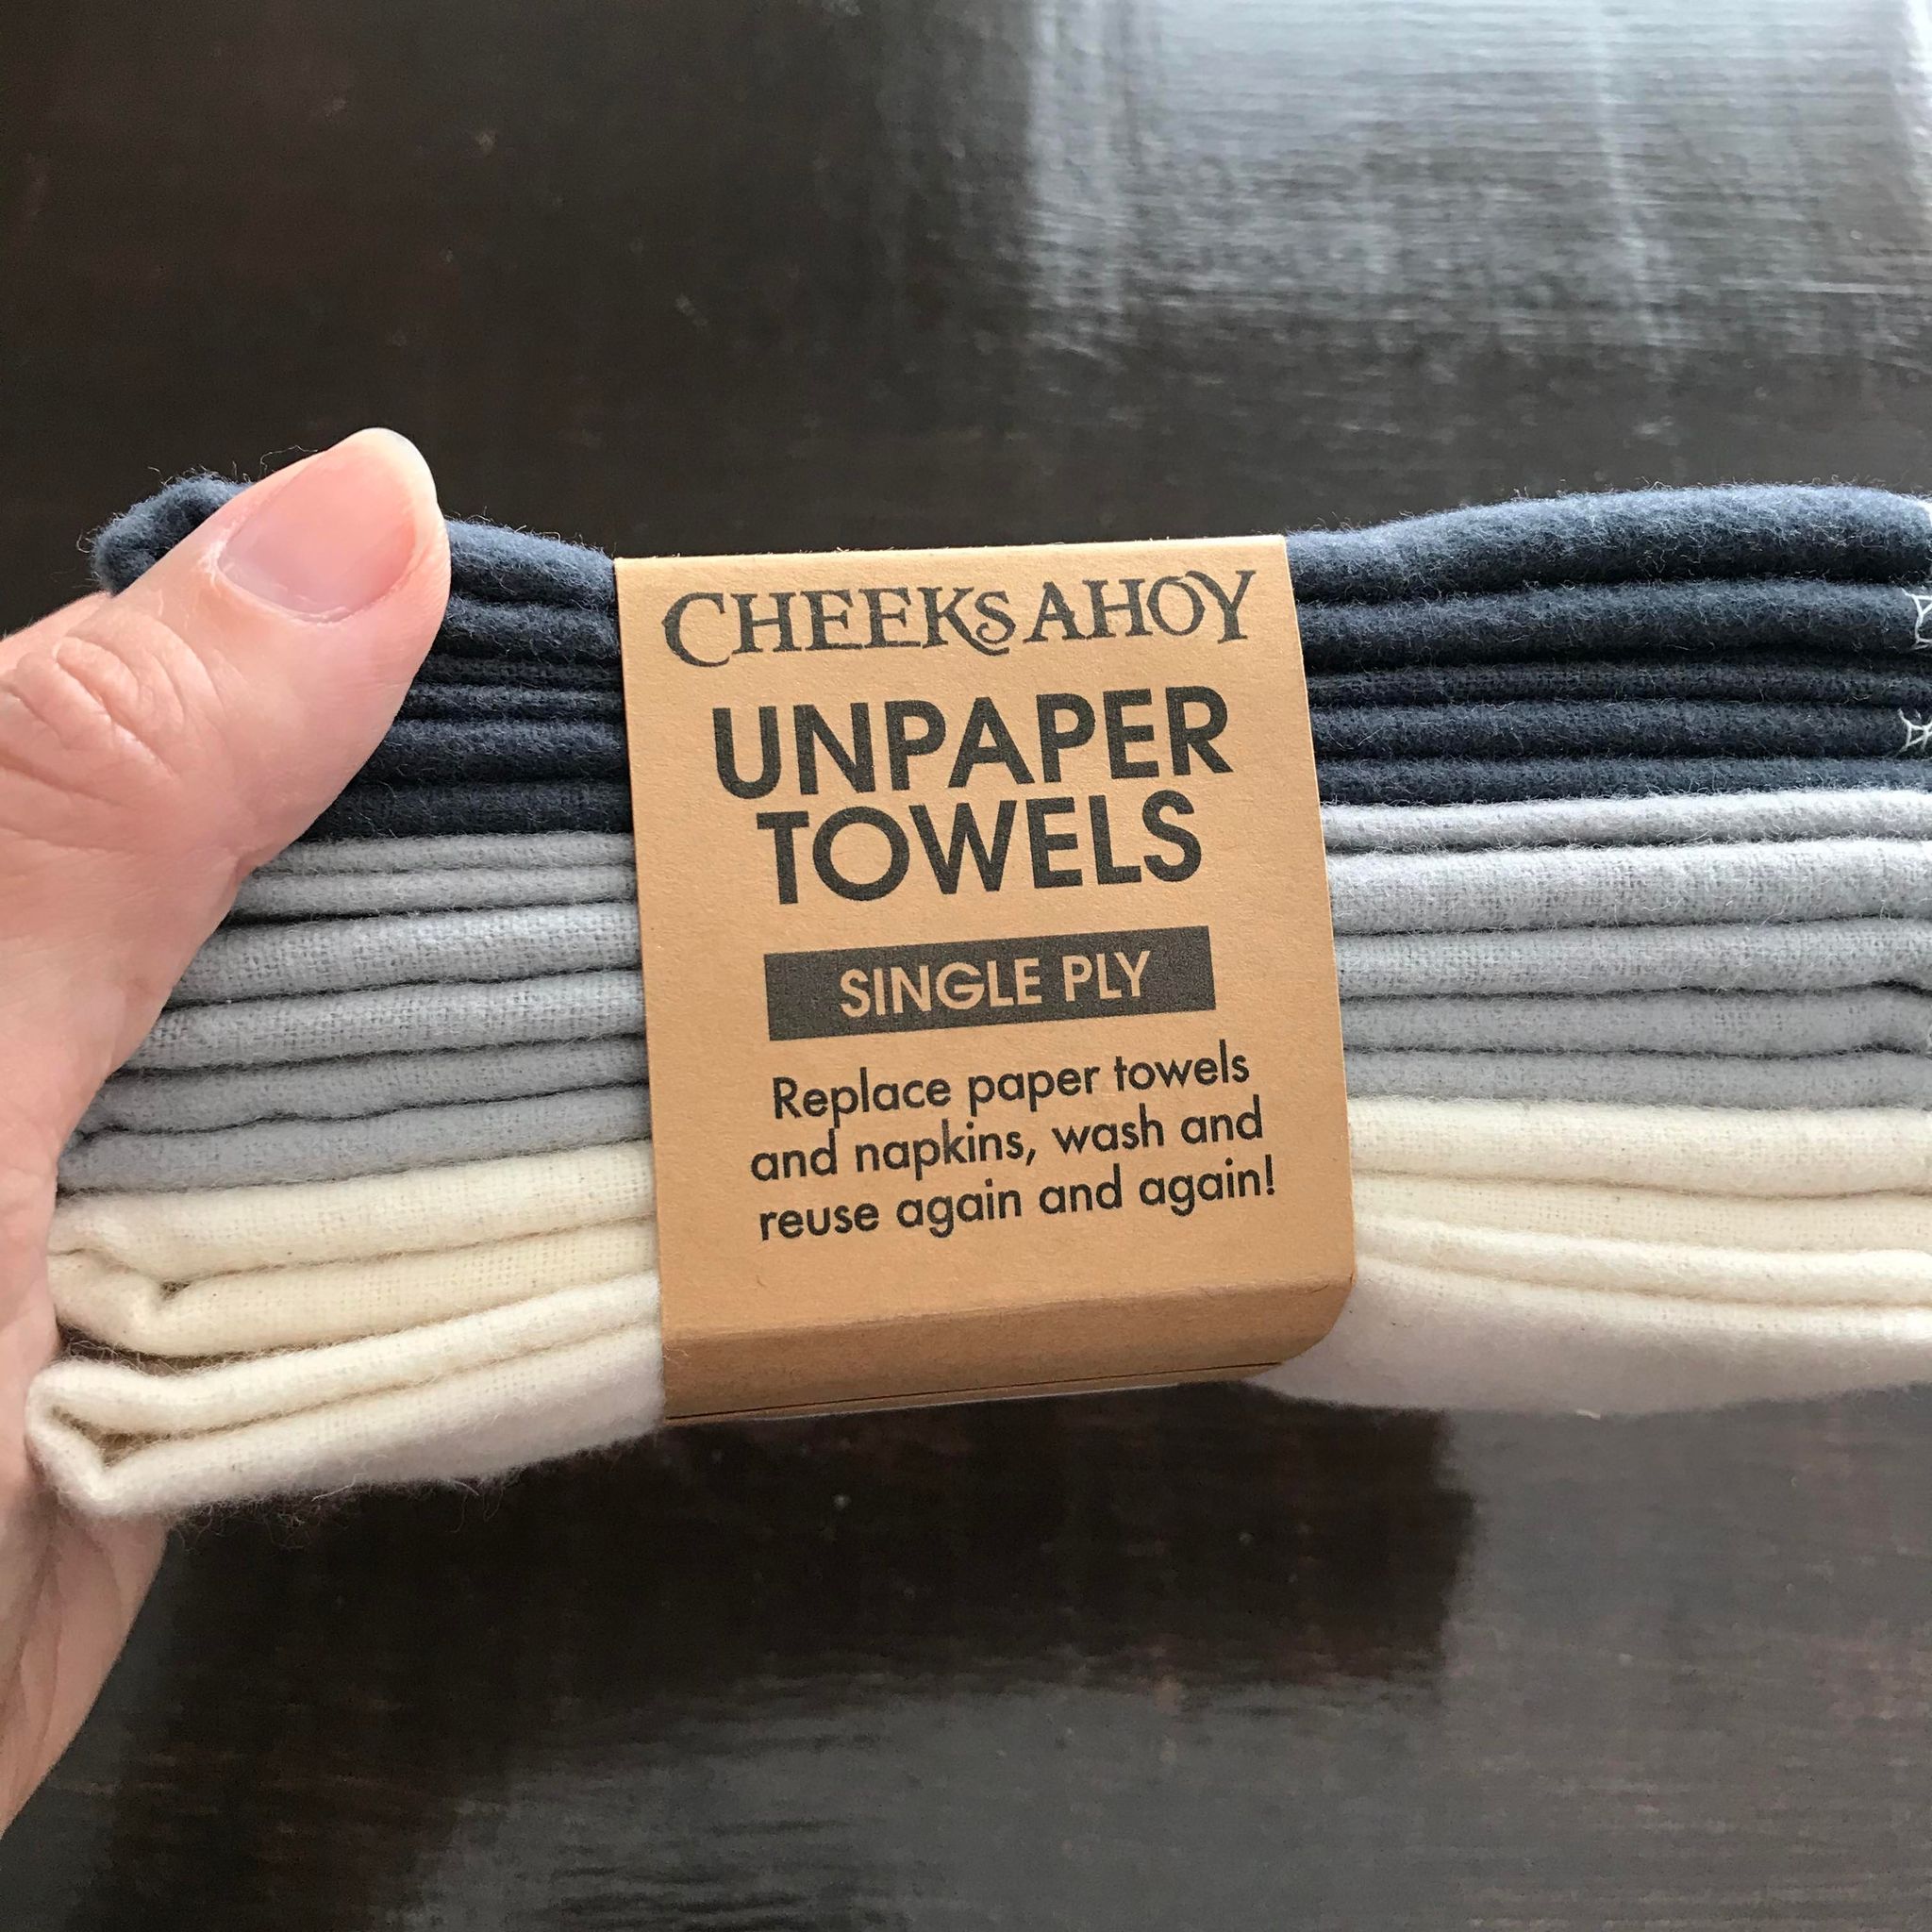 Set of 8 single ply cotton Unpaper Towels in warm neutral charcoal shades handmade in Canada by Cheeks Ahoy replace paper towels and napkins, wash and reuse again and again